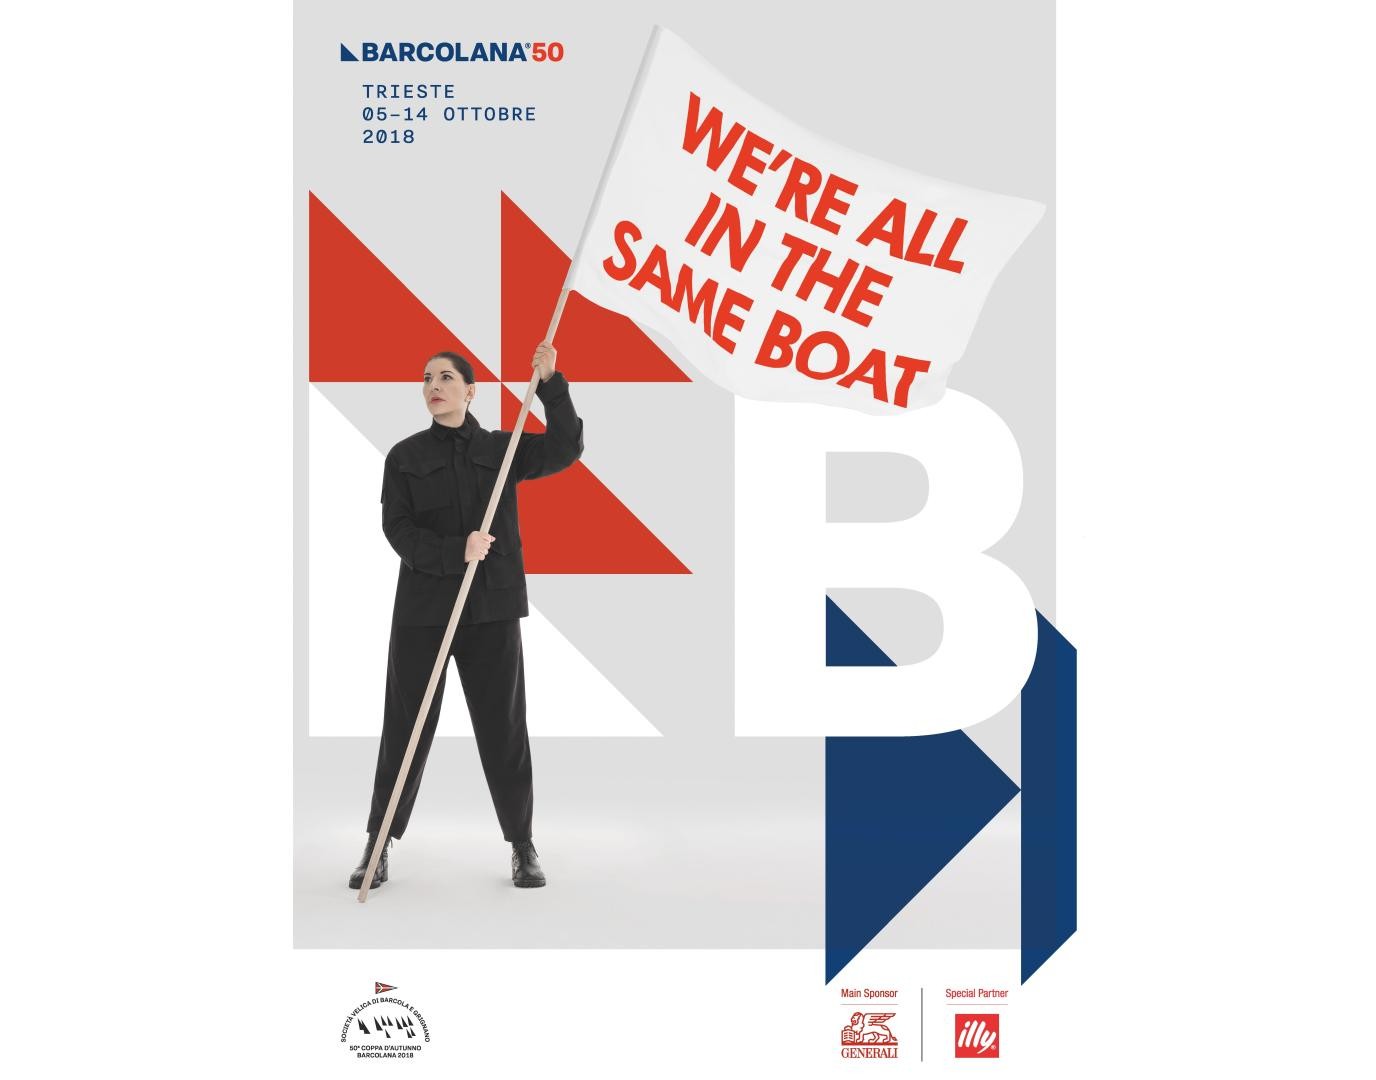 50a Barcolana, 'We are all in the same boat'